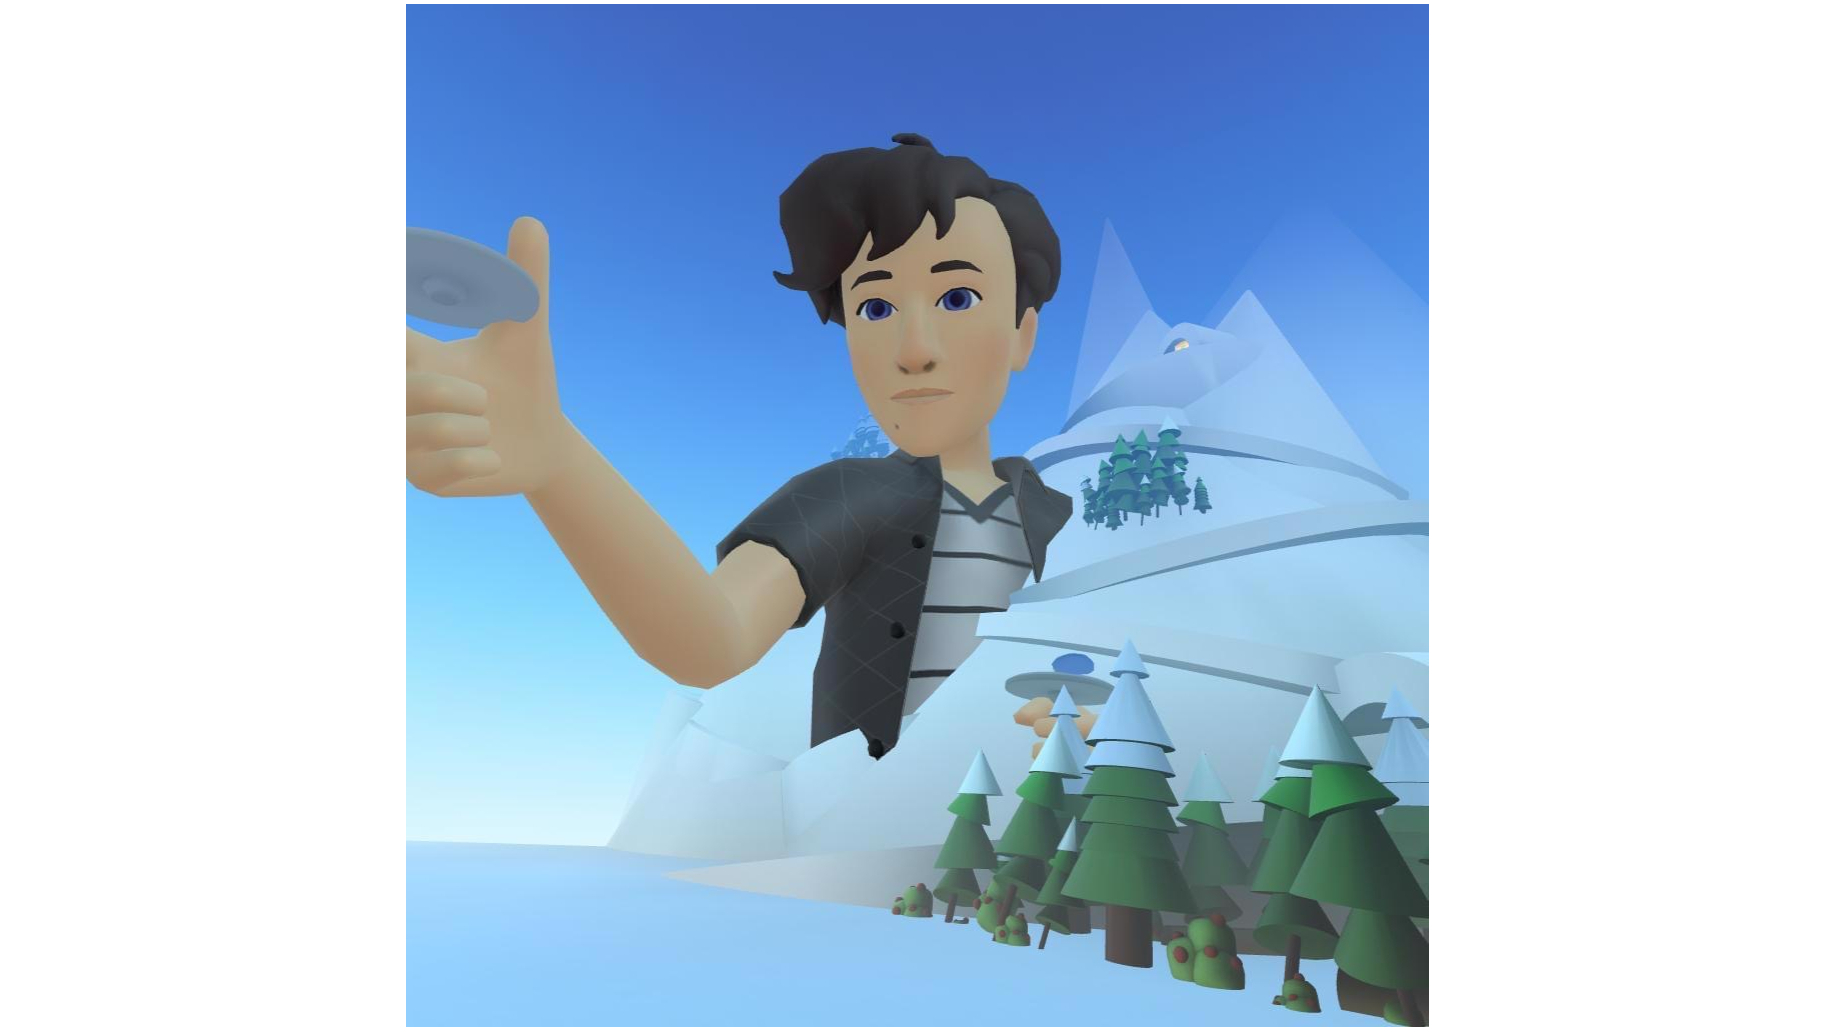 My giant avatar comes from a mountain with a disk